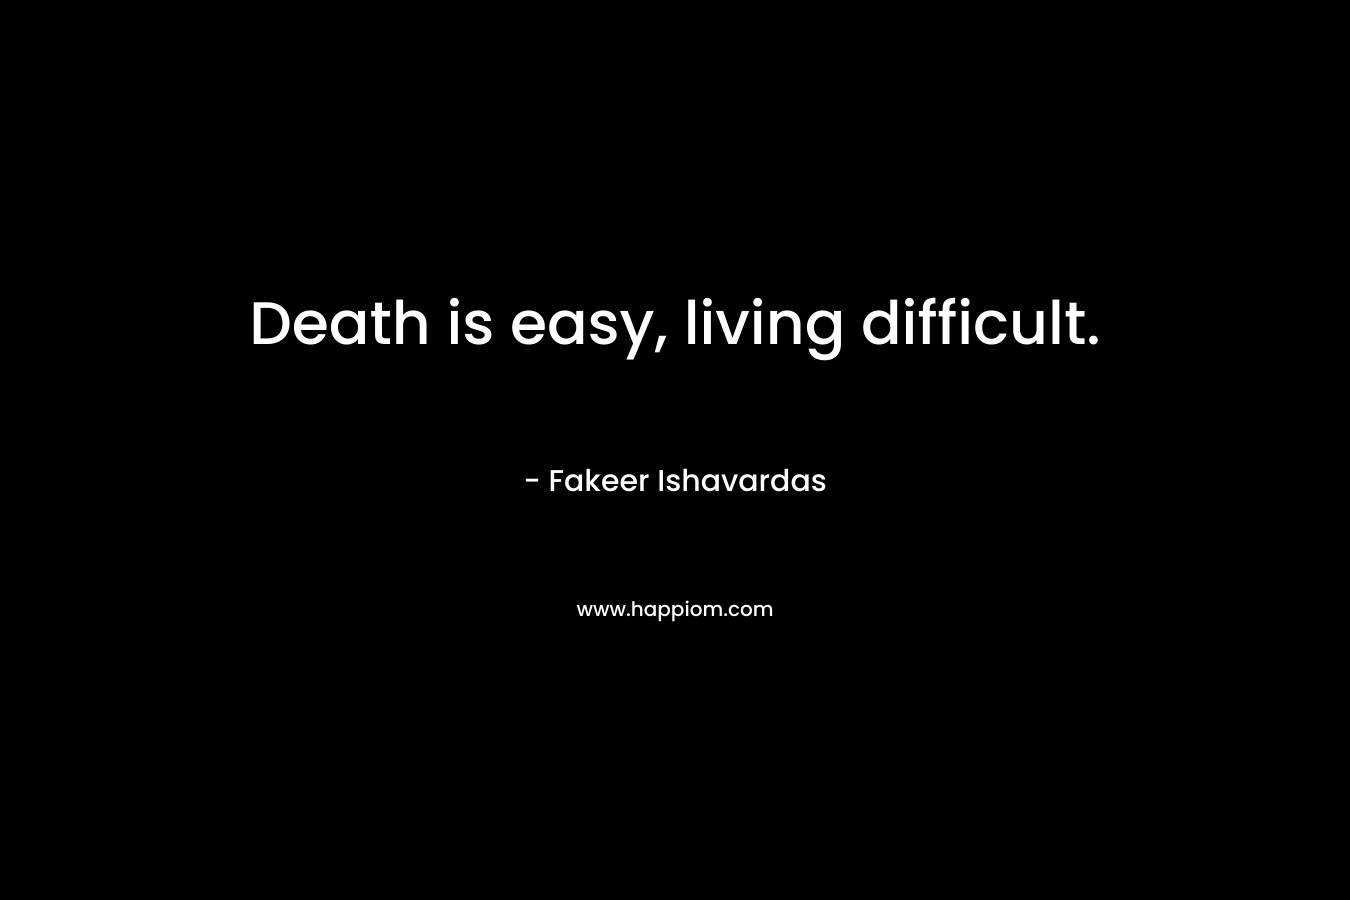 Death is easy, living difficult.